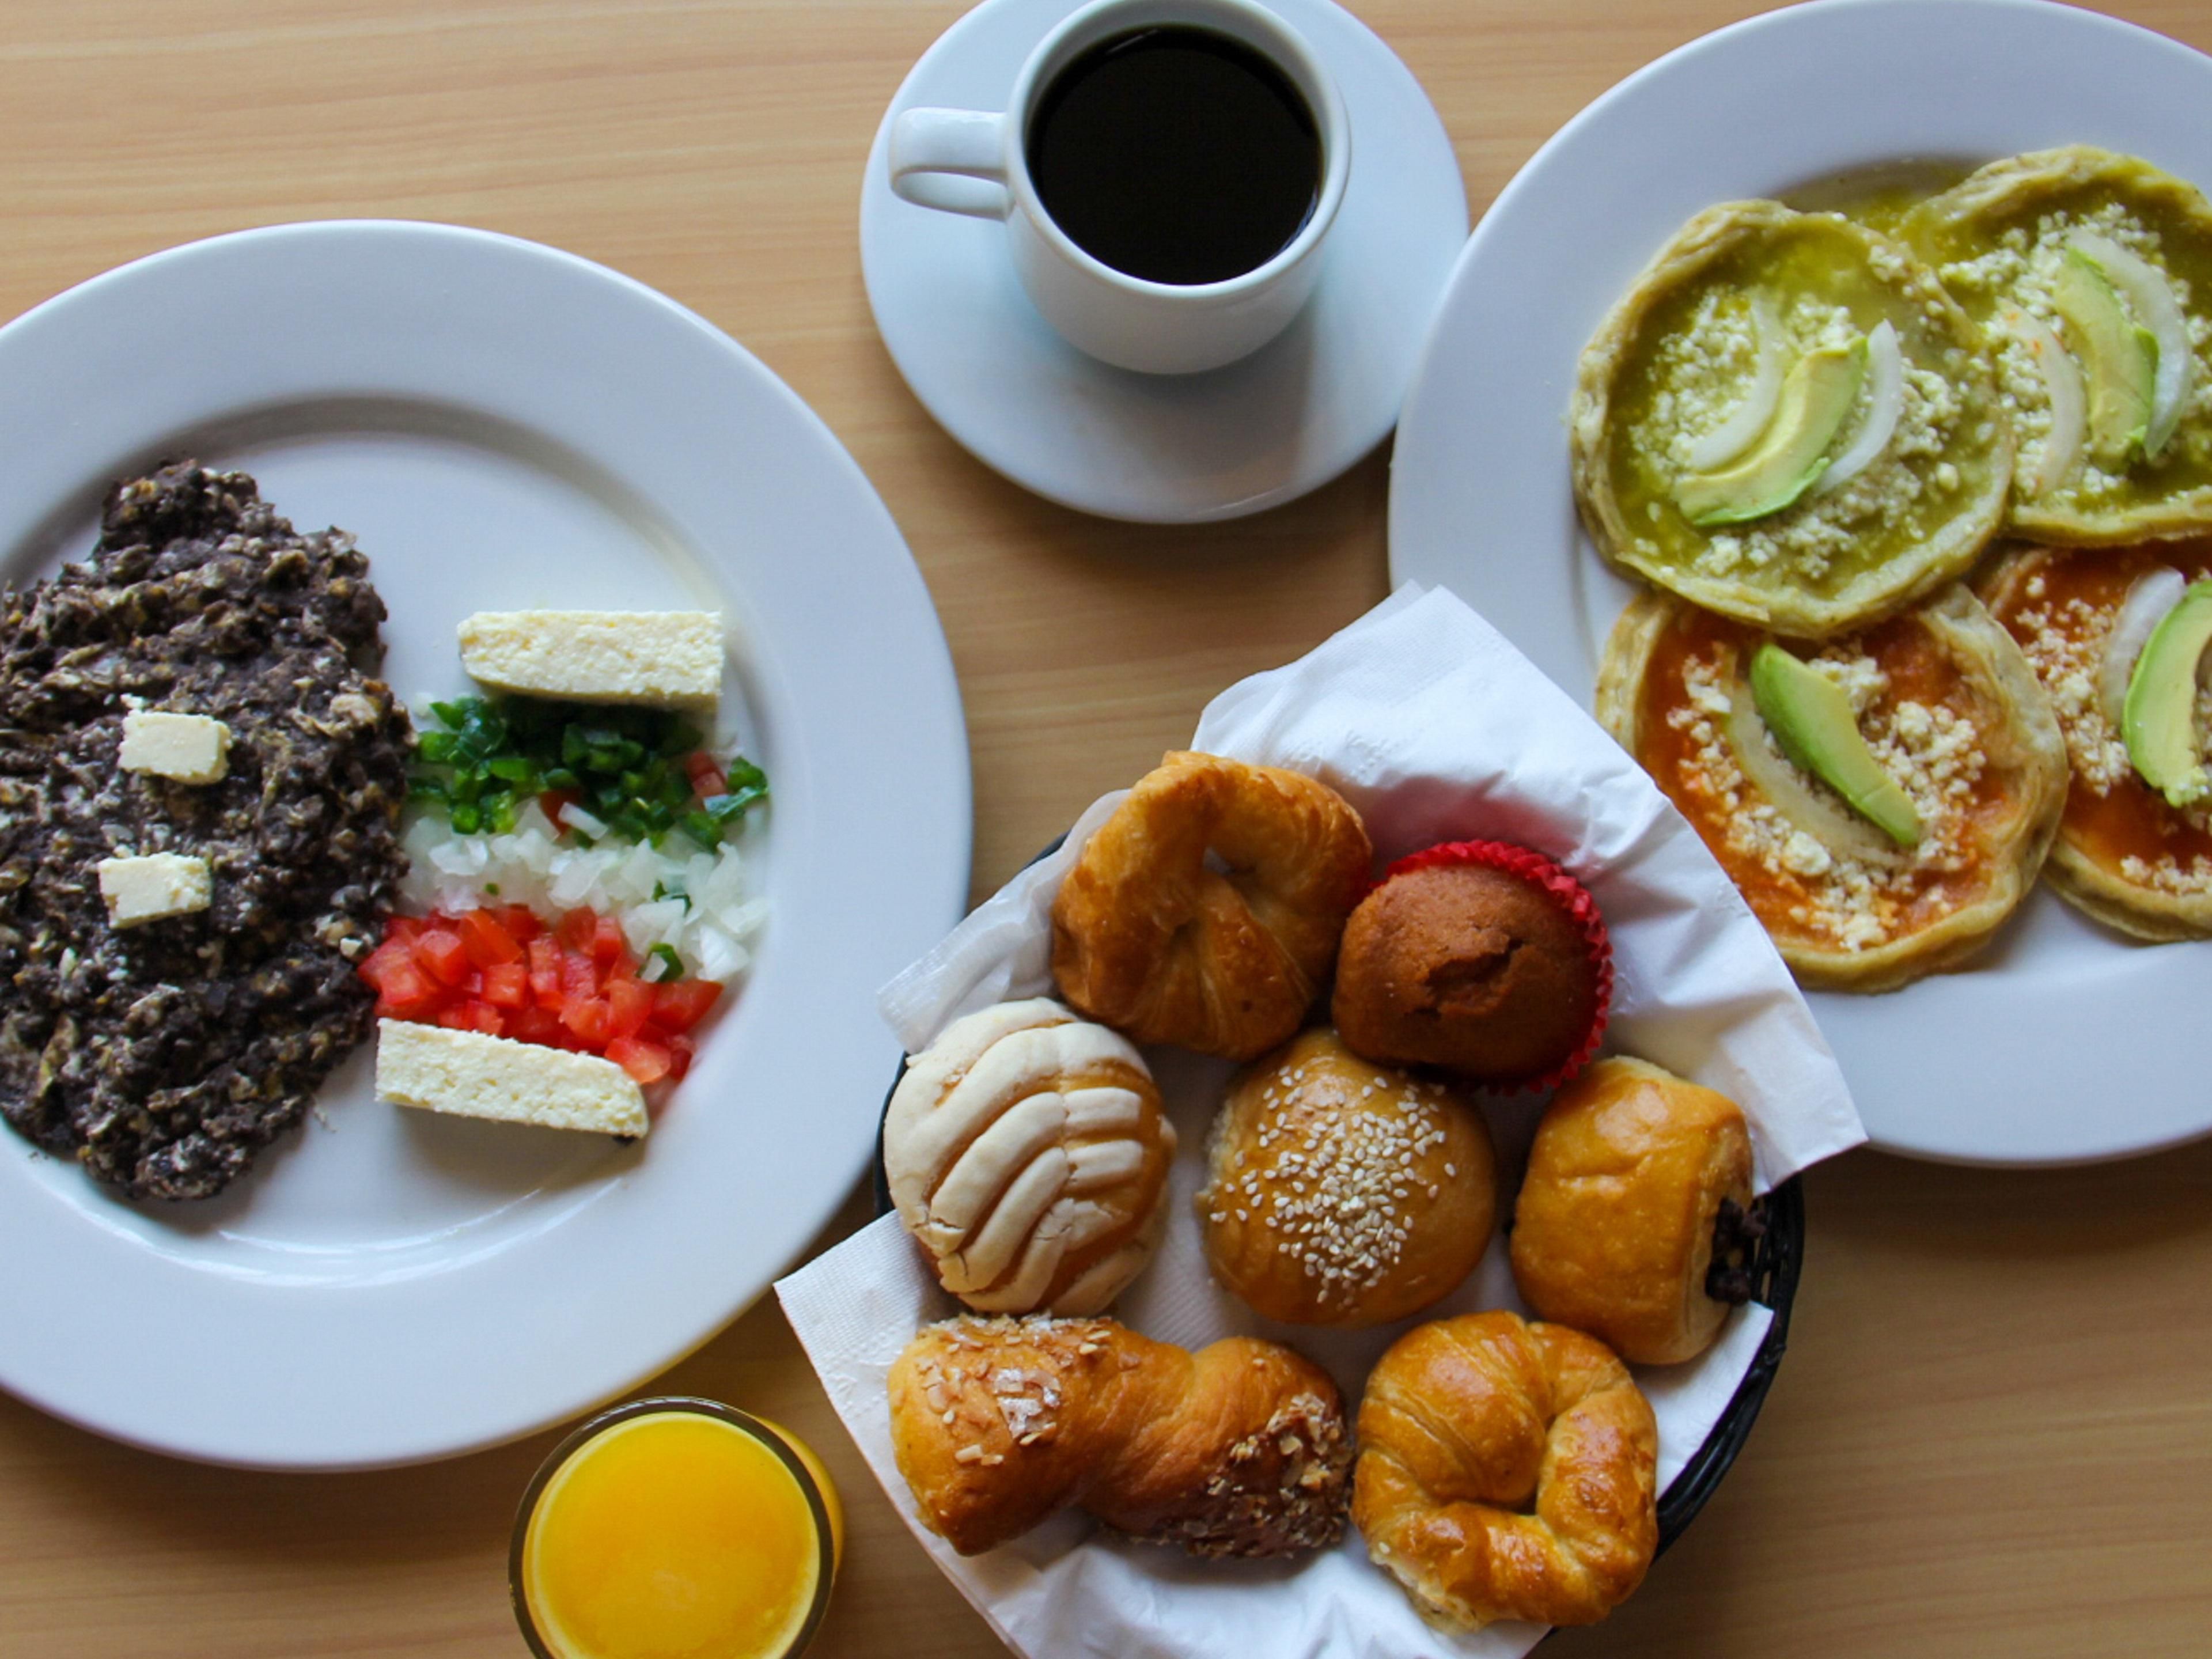 The best of Veracruz gastronomy can be found at Café San Francisco, starting the day with a typical breakfast is the best option.